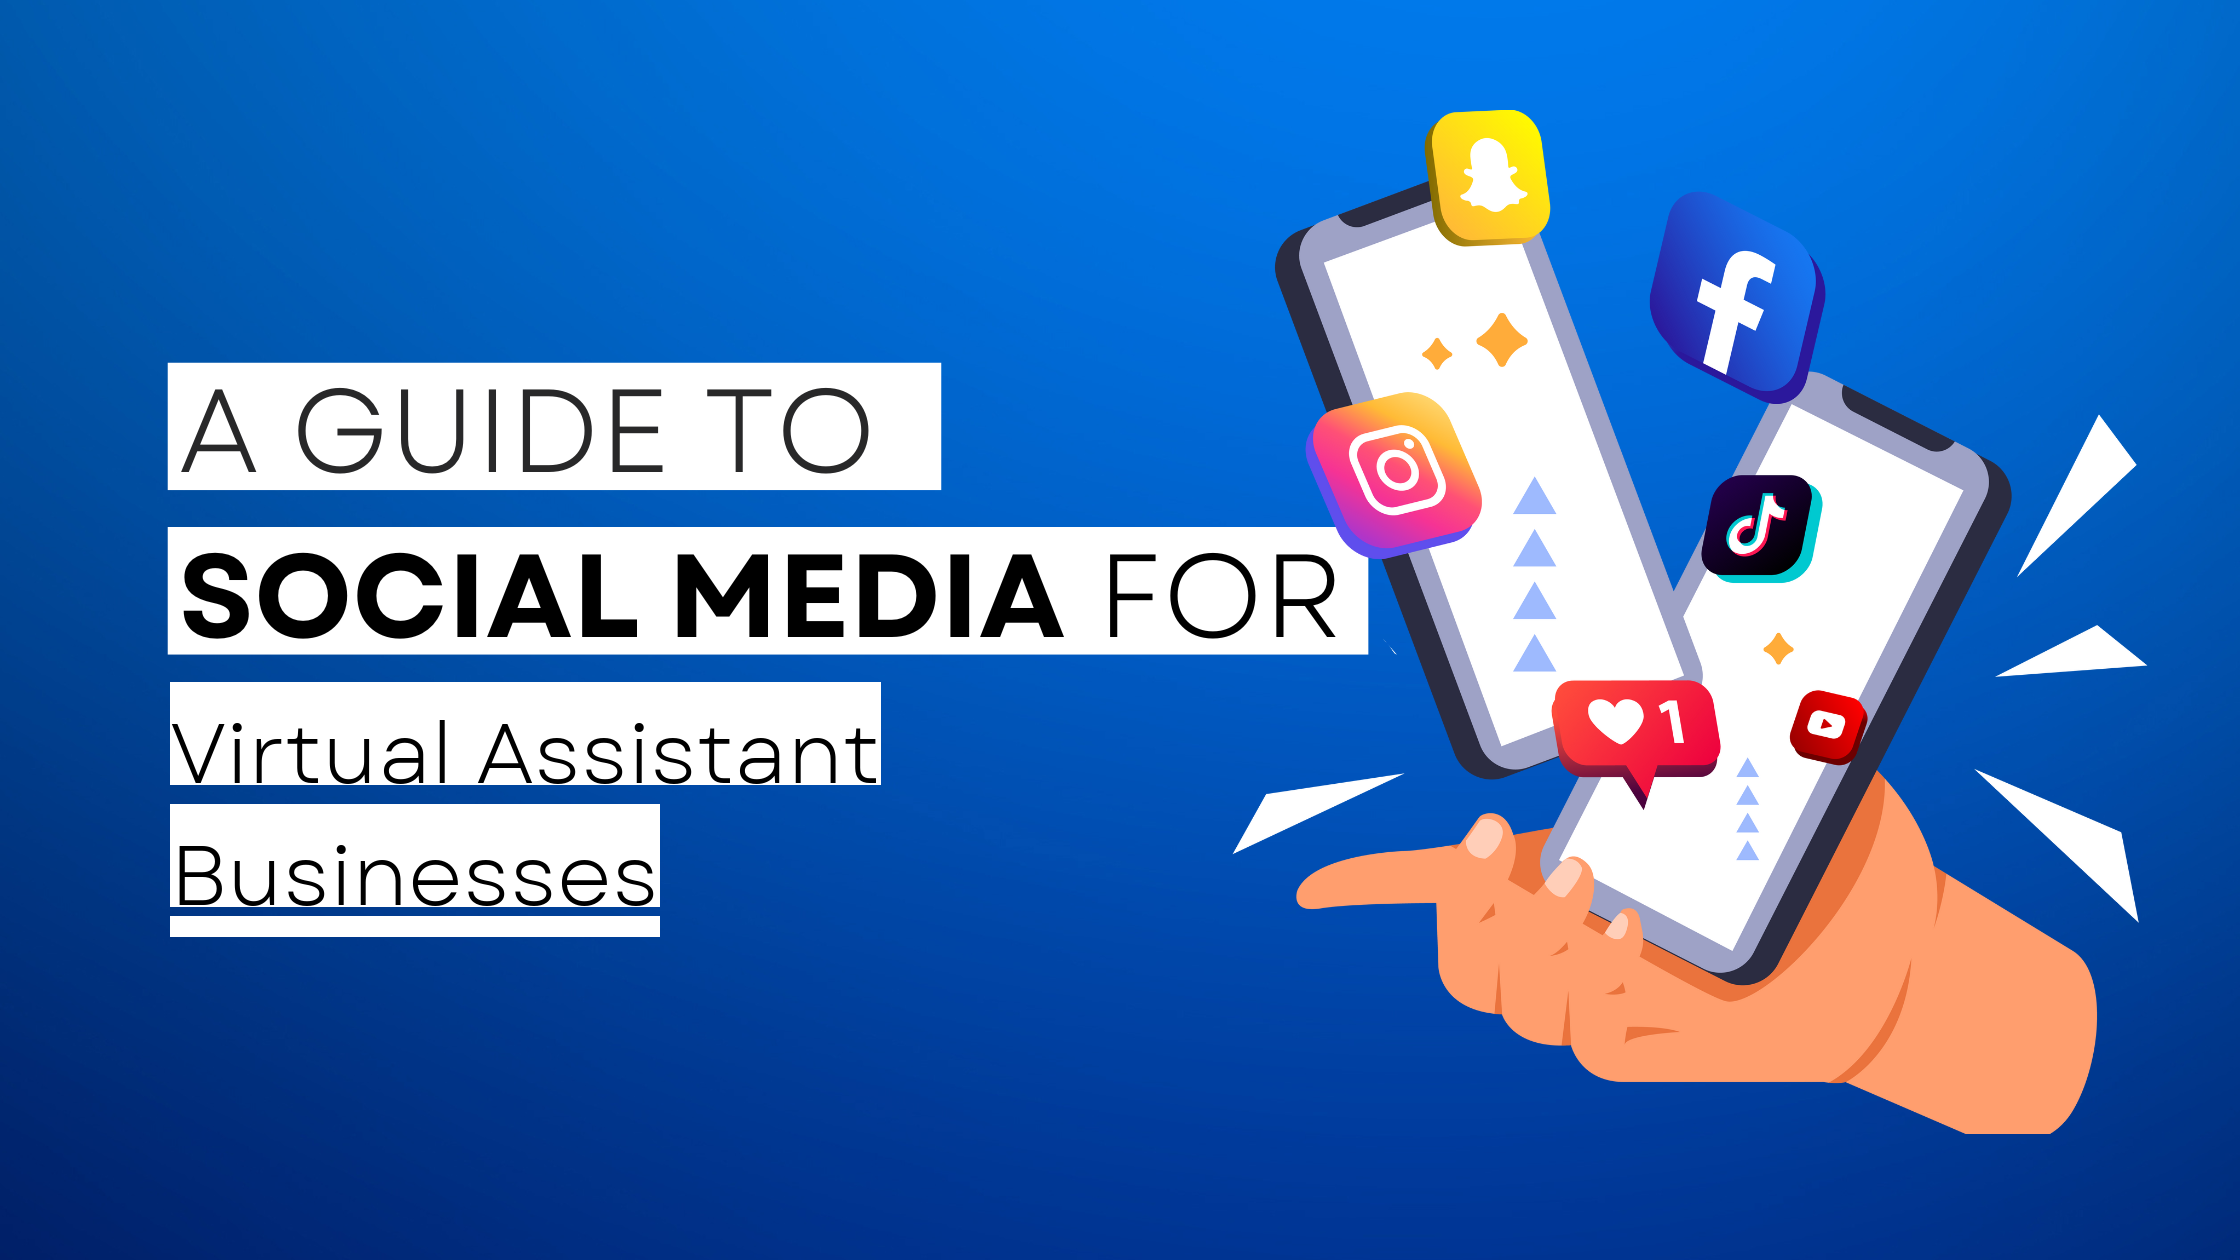 How to start Virtual Assistant on social media